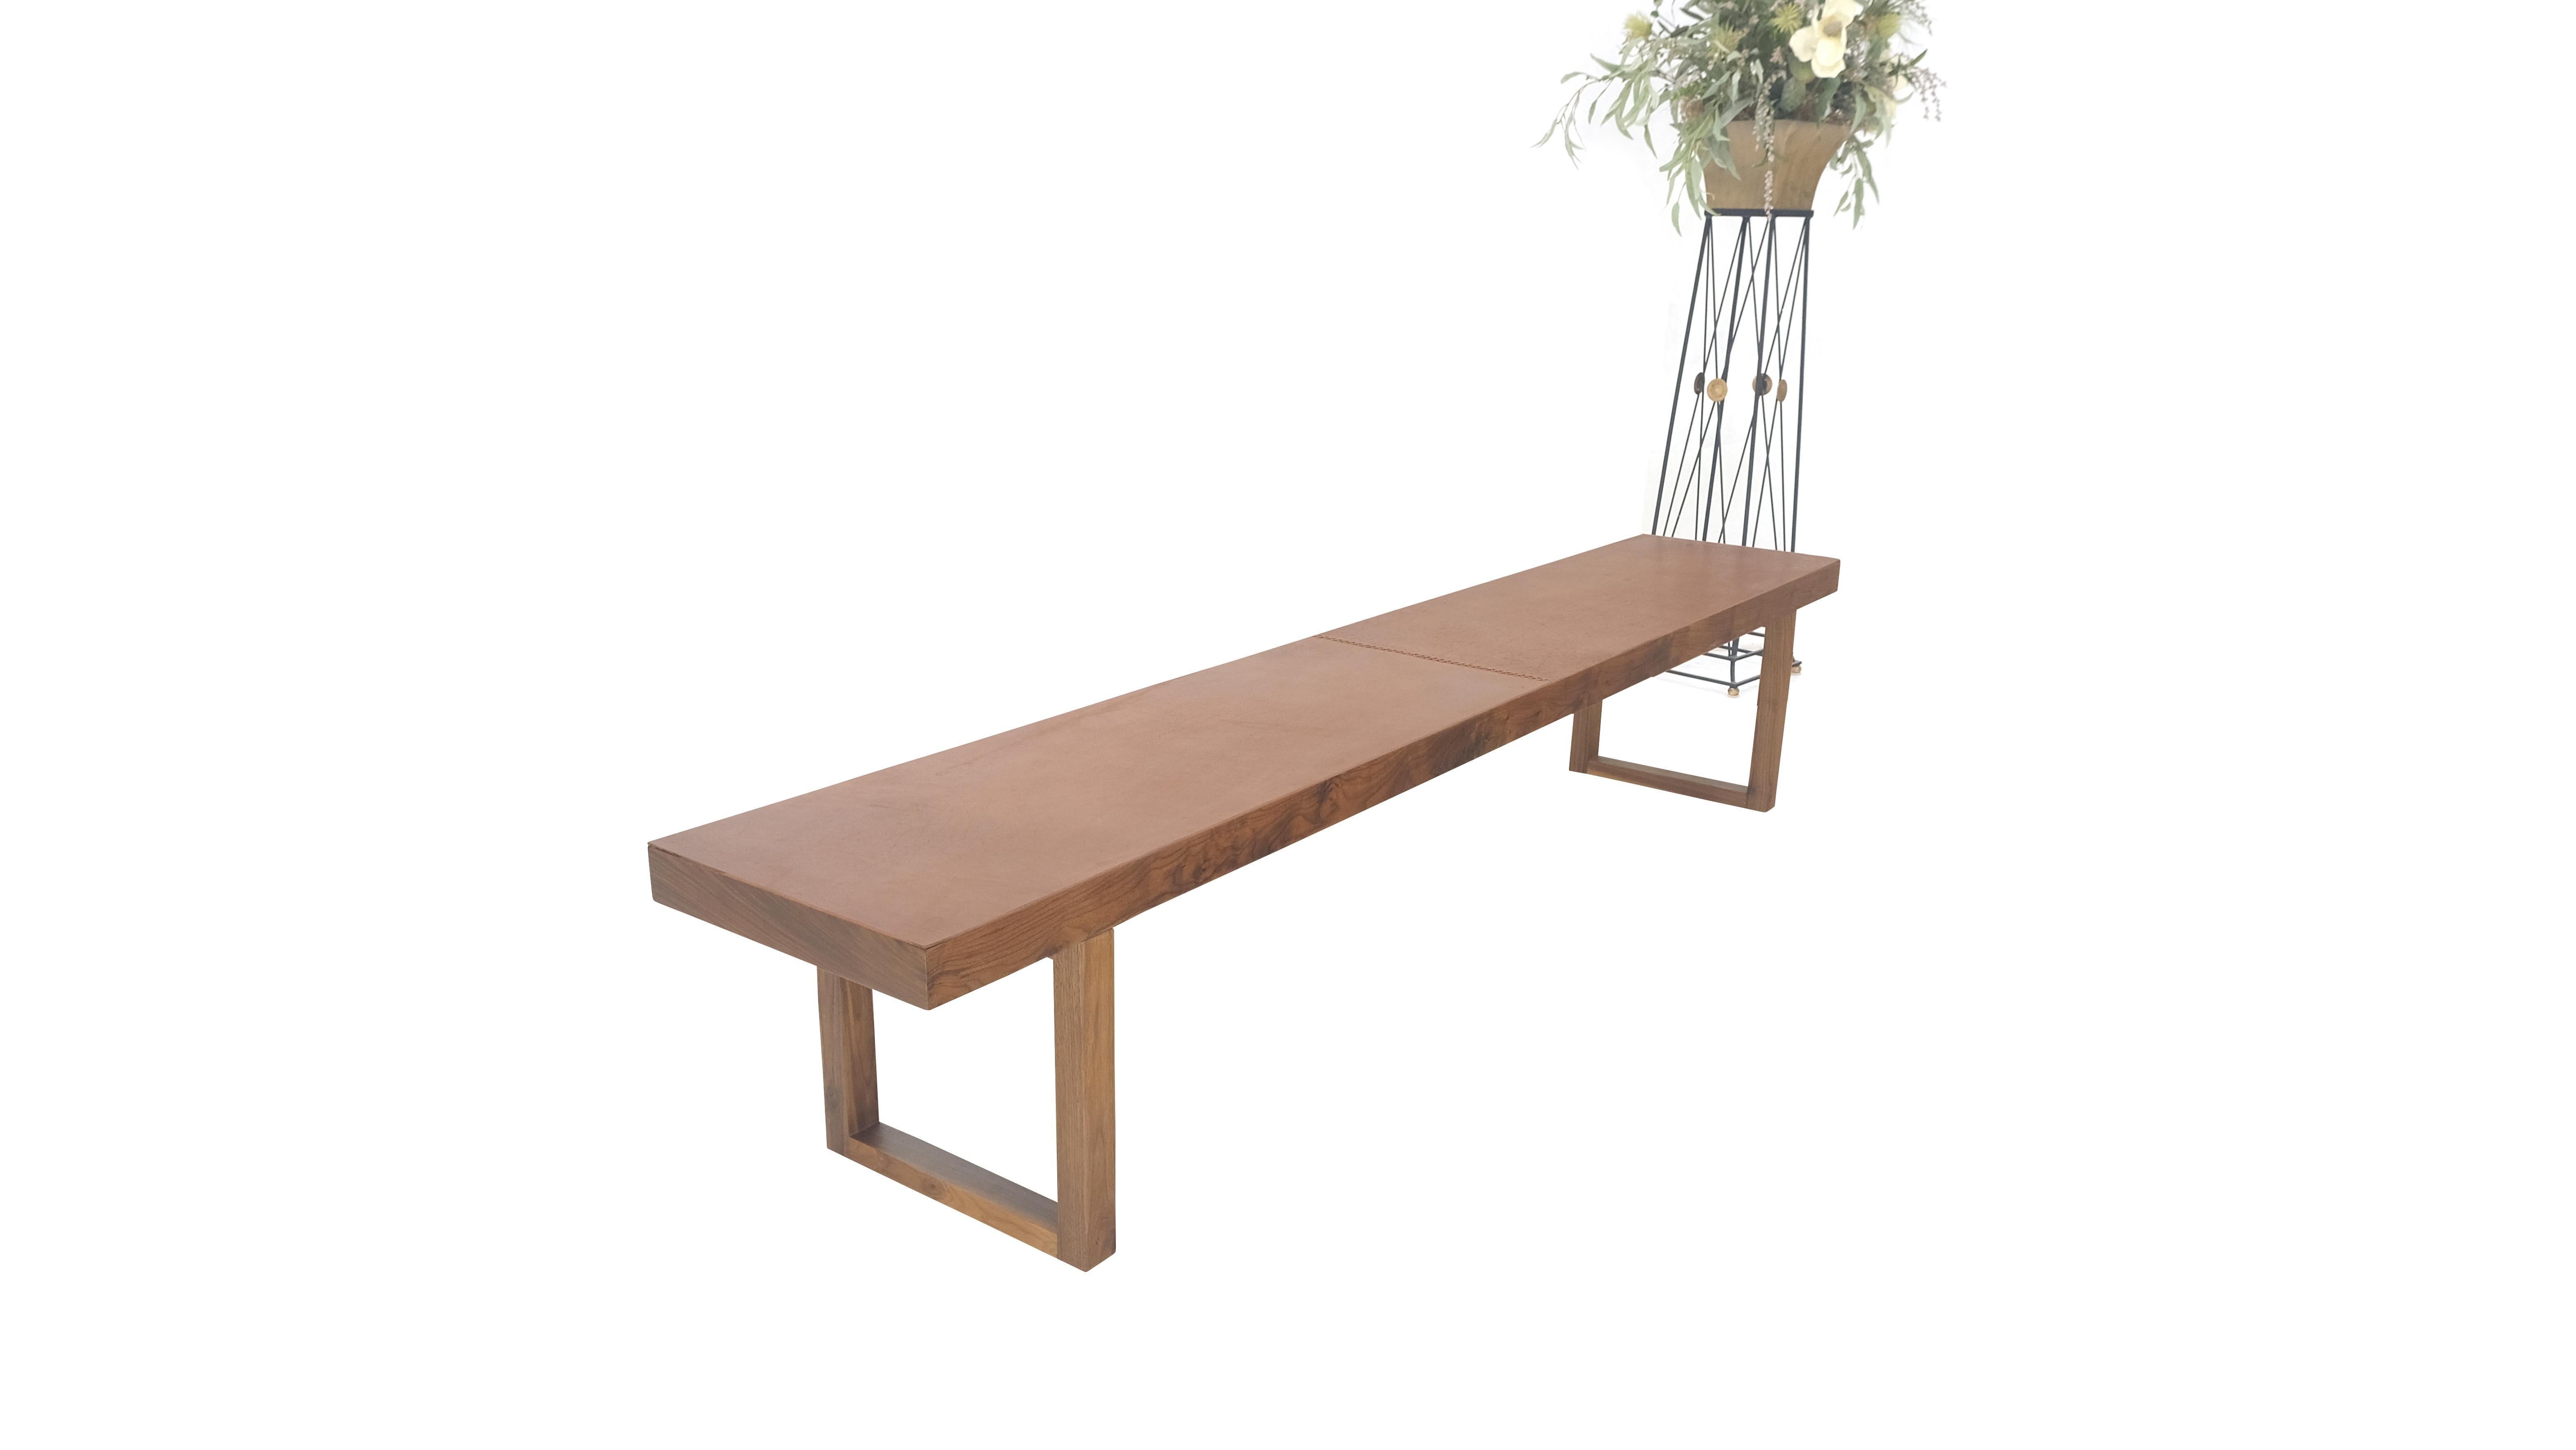 Leather Slim Profile Solid Walnut Frame Integrated leather Cushion 7.5' Long Bench For Sale